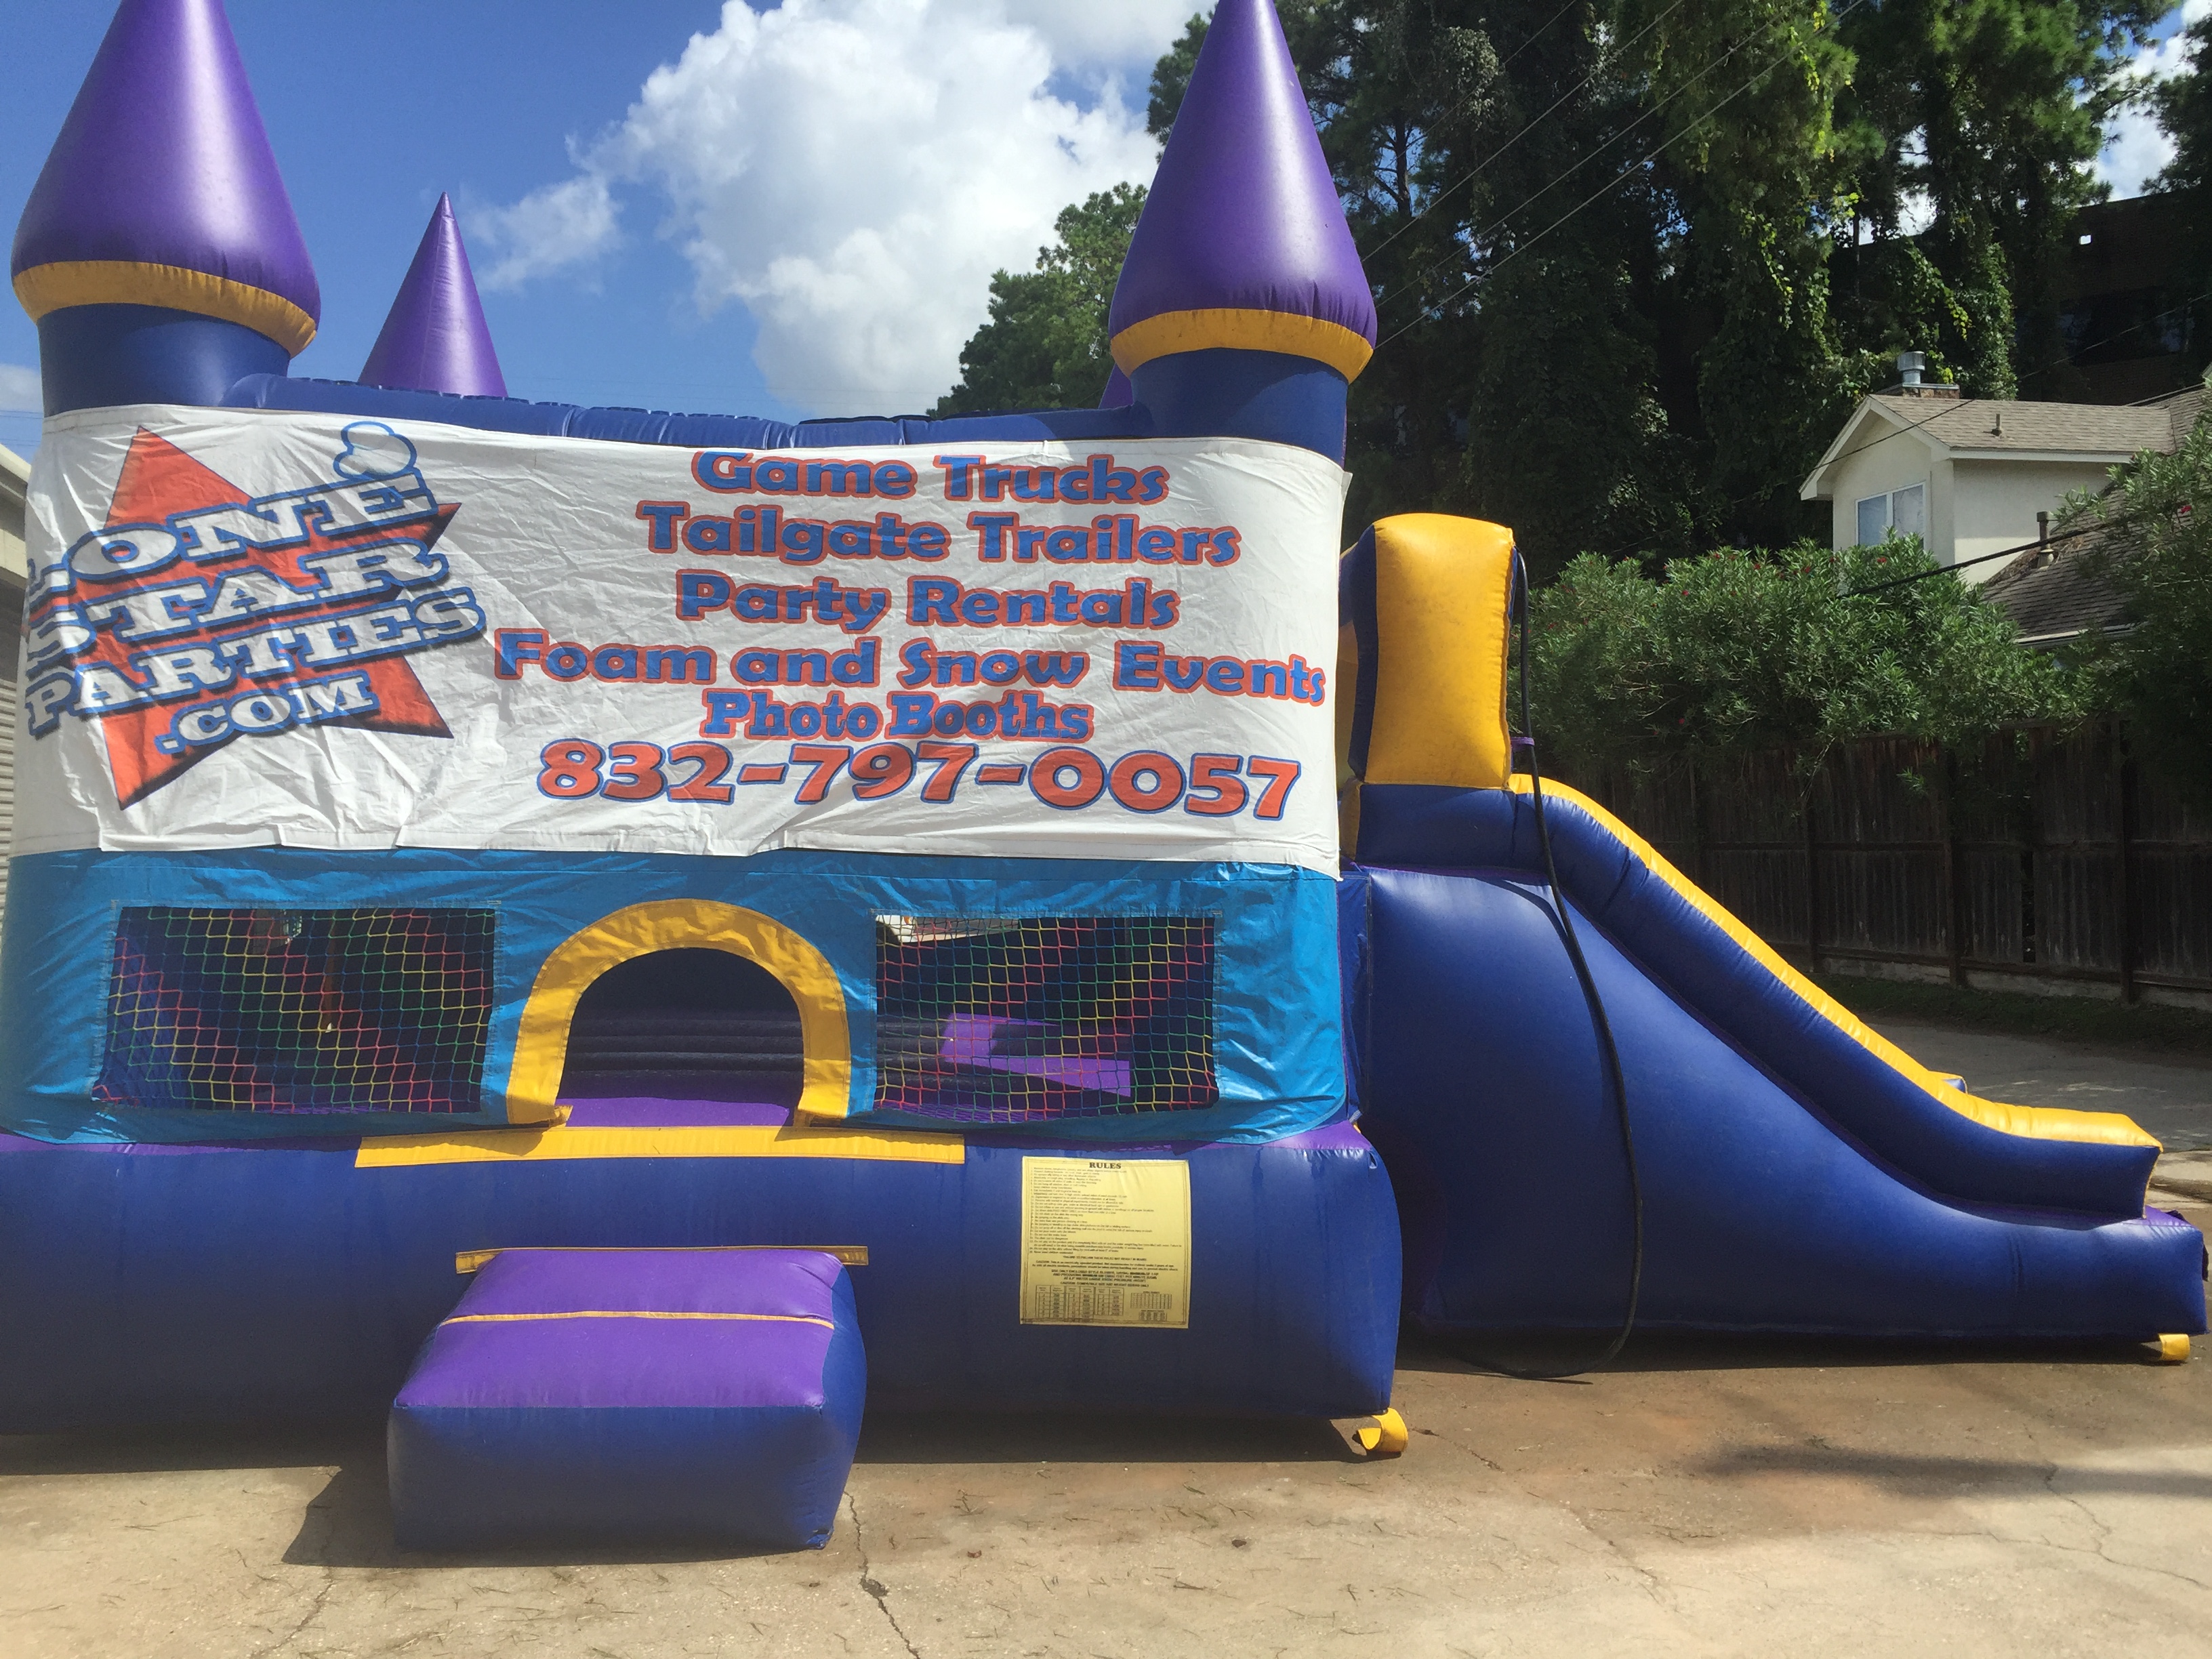 What Is The Best Inflatables Long Island Service In My Area? thumbnail